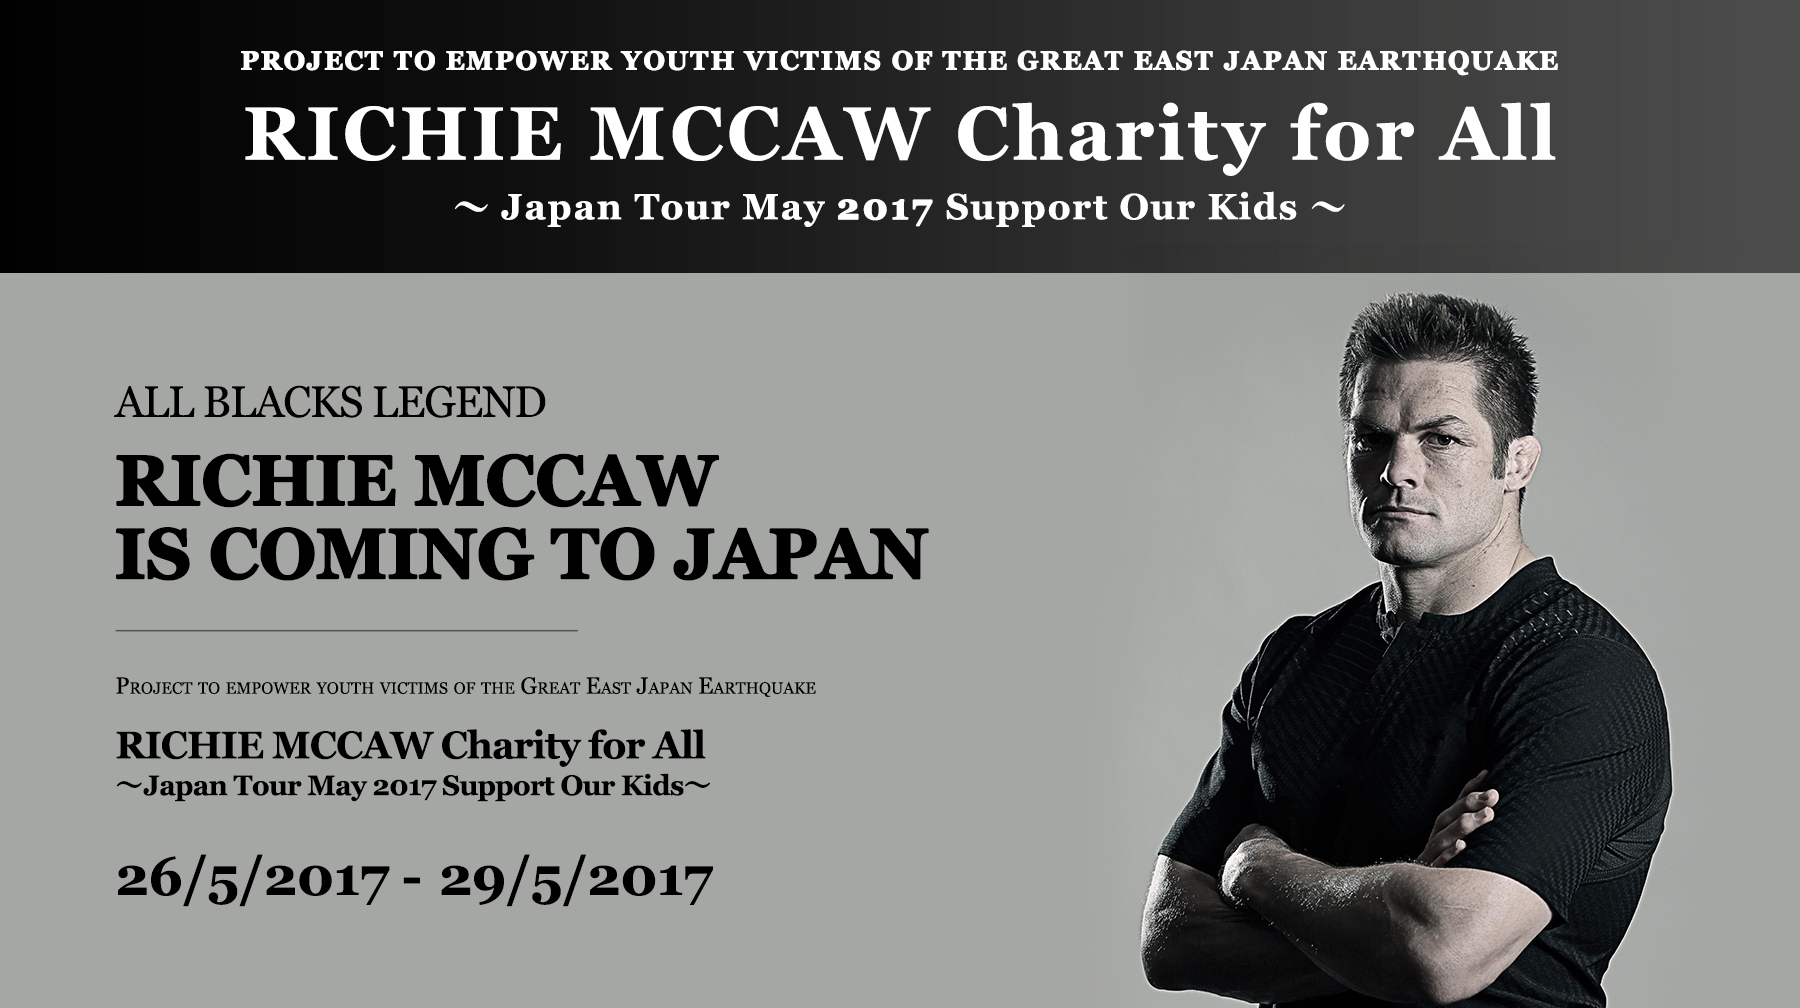 RICHIE MCCAW Charity for All 〜Japan Tour May 2017 Support Our Kids〜 All Blacks legend Richie McCaw is coming to Japan